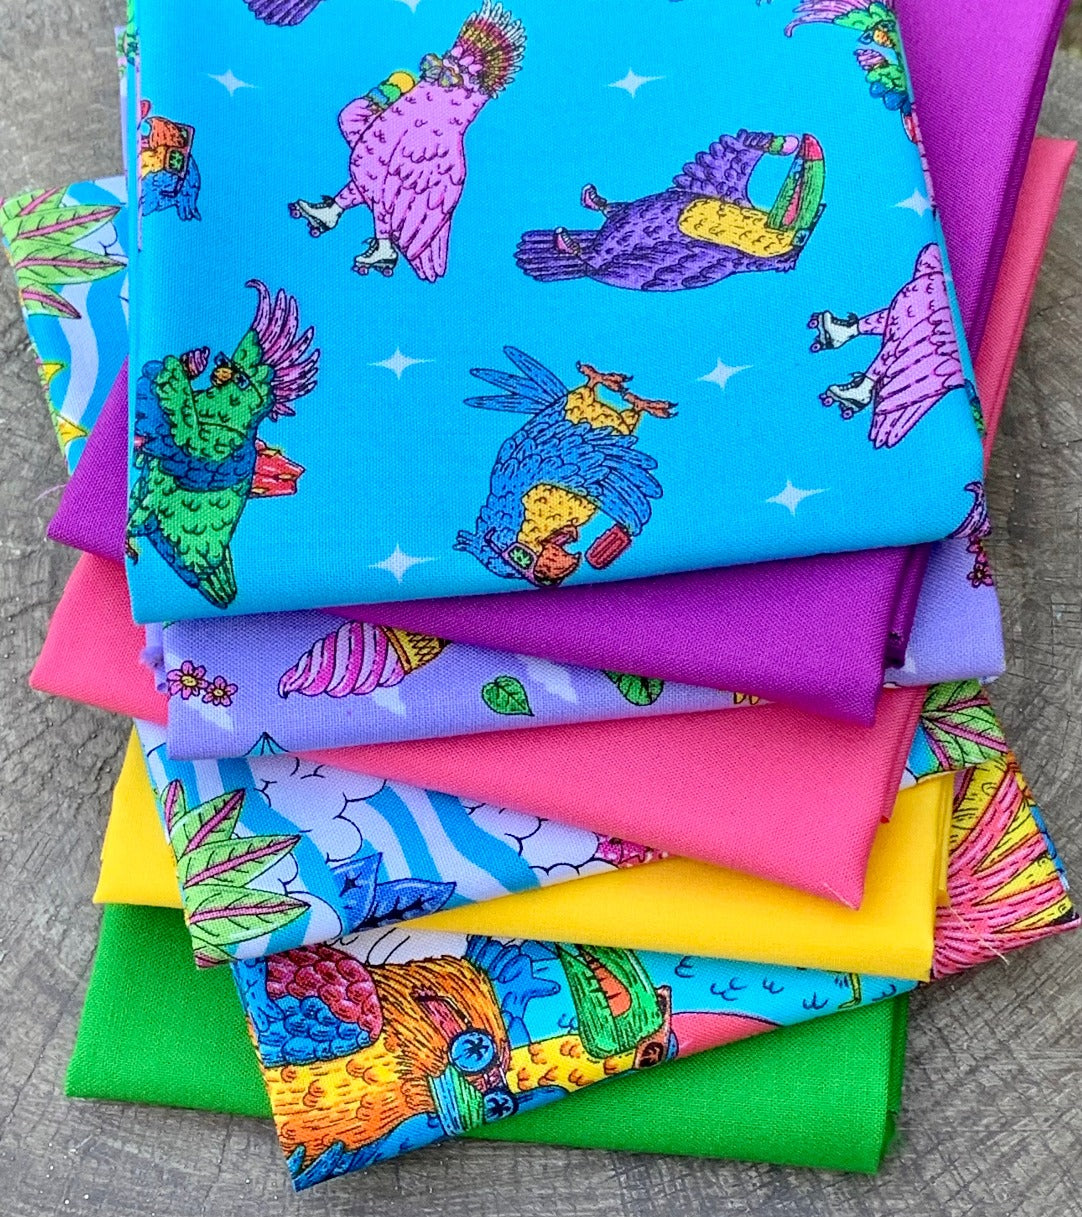 Mulga the Artist Summer Birds Fabrics for Free Spirit Parrots Tucans Roller Skate Mohawk ice cream popsicle bright colors pink purple yellow green turquoise Kona cotton color of the year Cosmos material quilting sewing project 